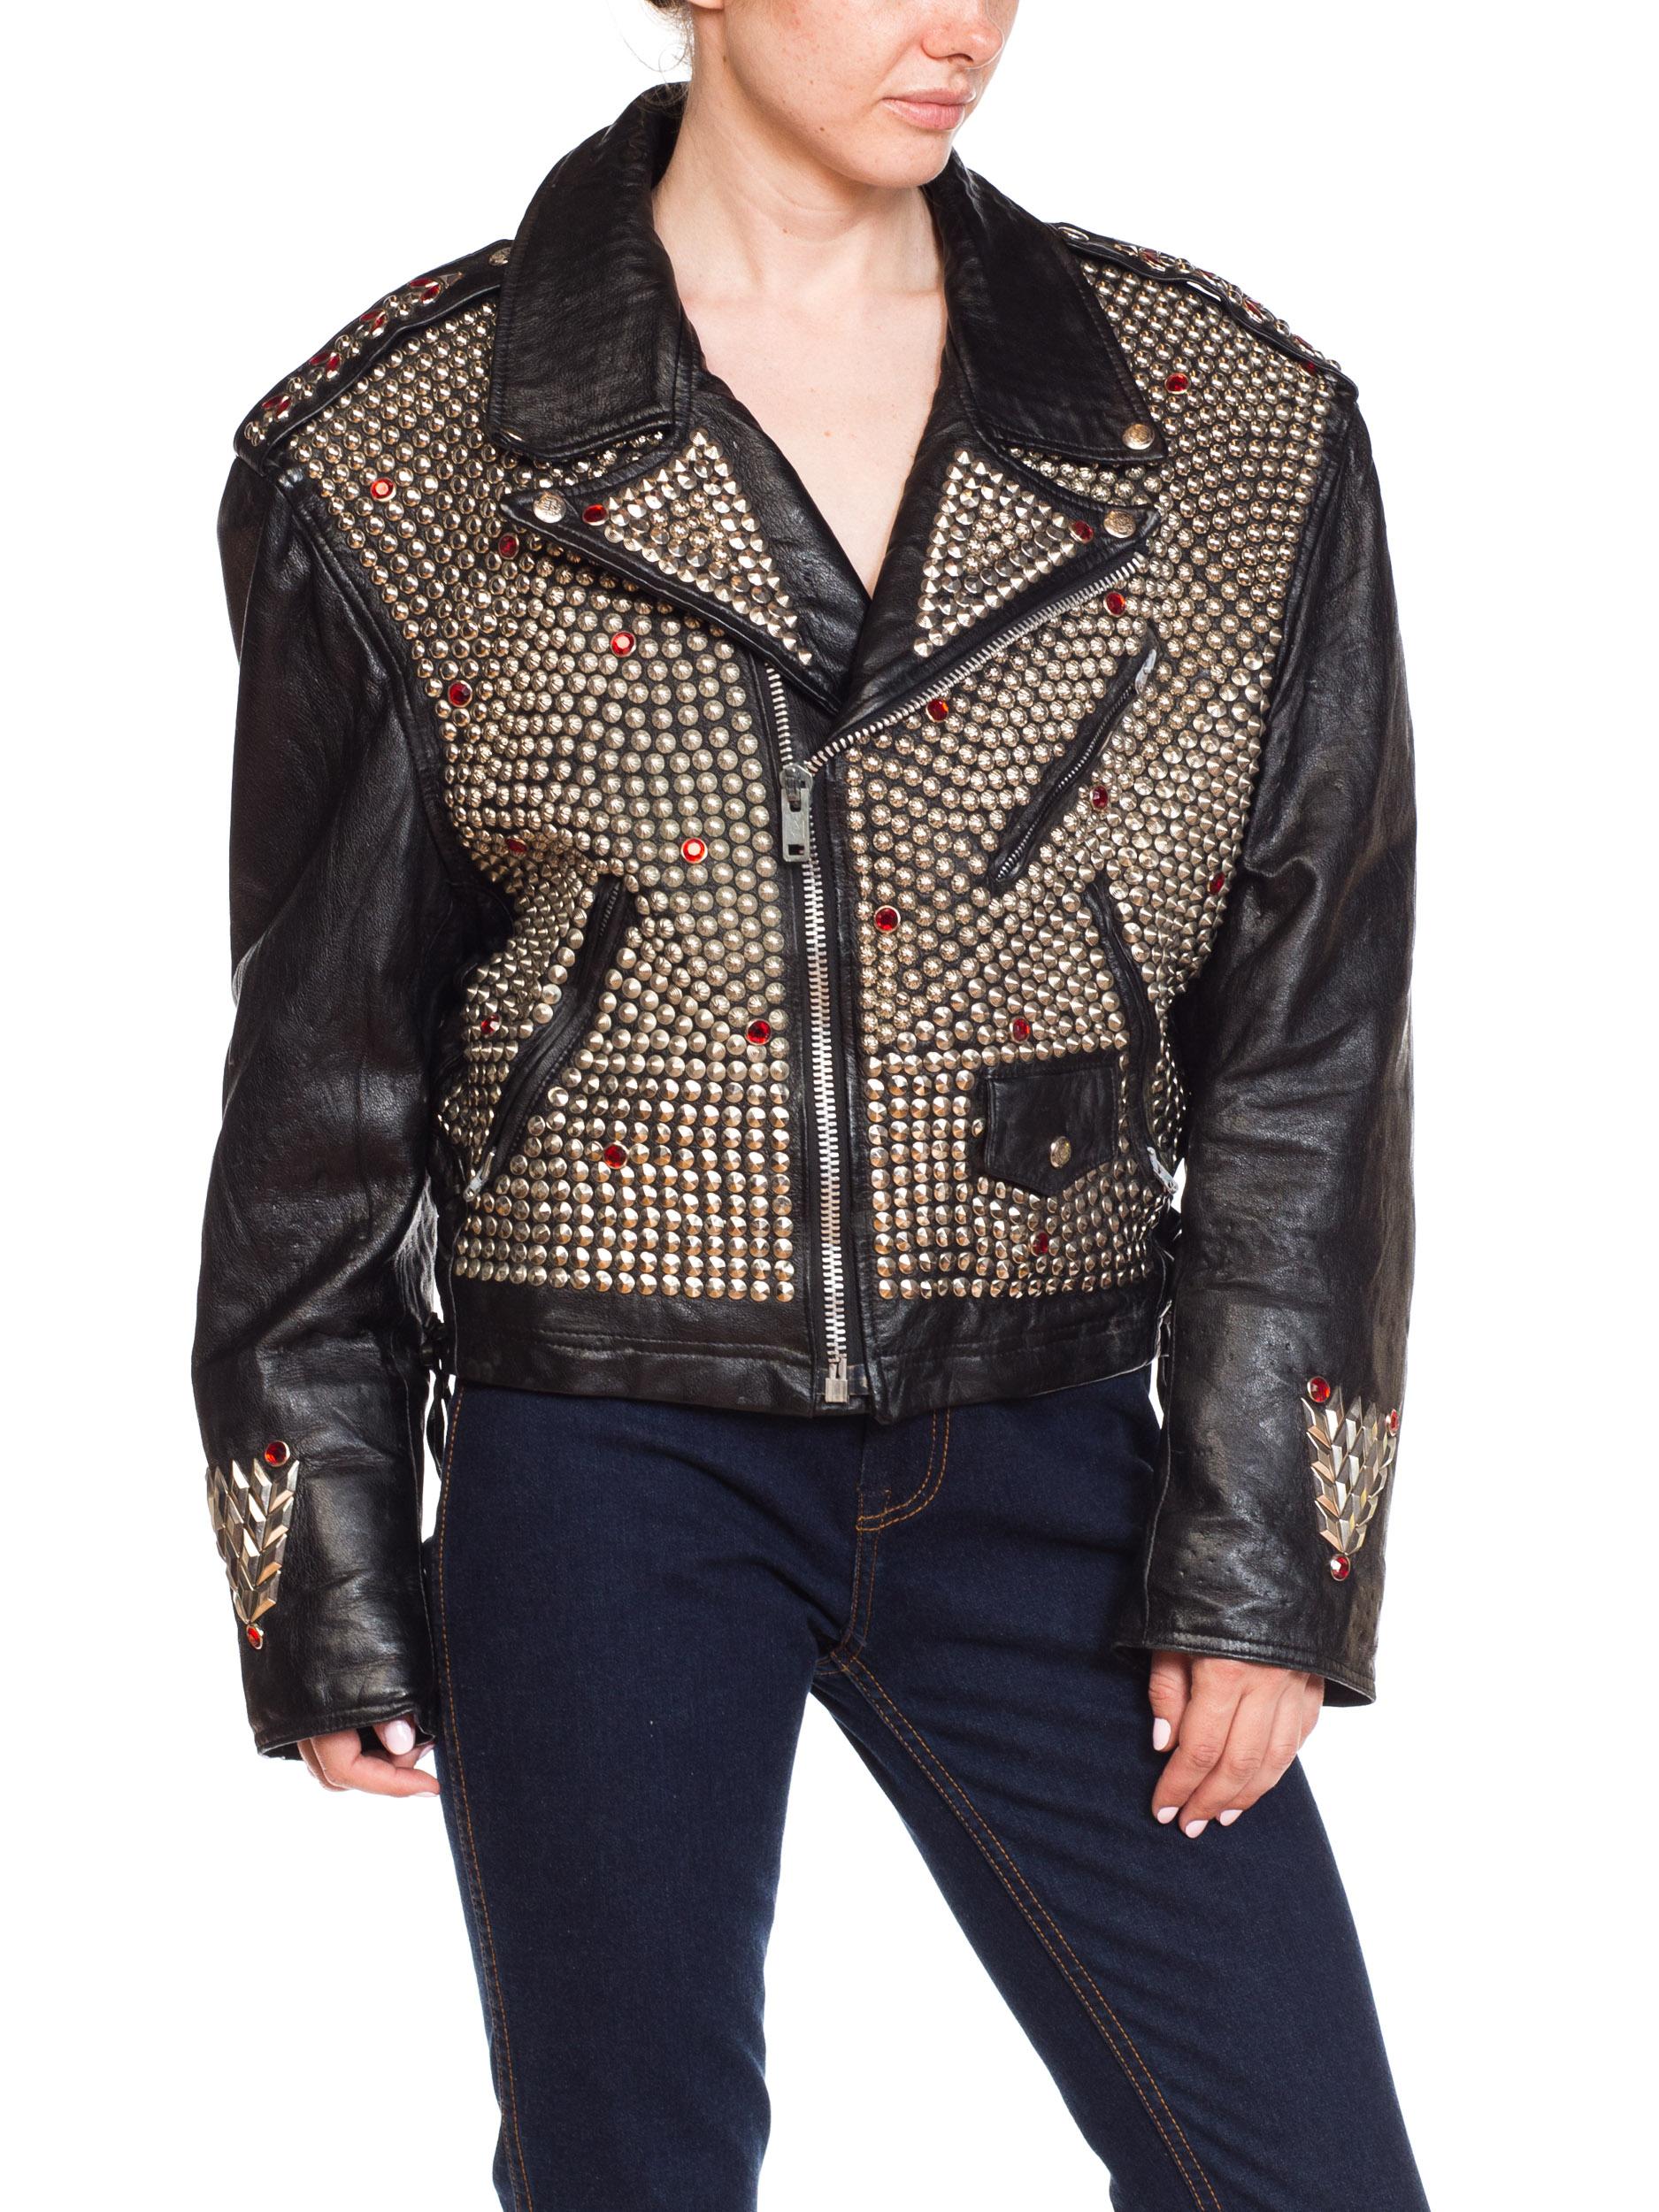 Leather Biker Jacket Covered in Studs & Crystals 2